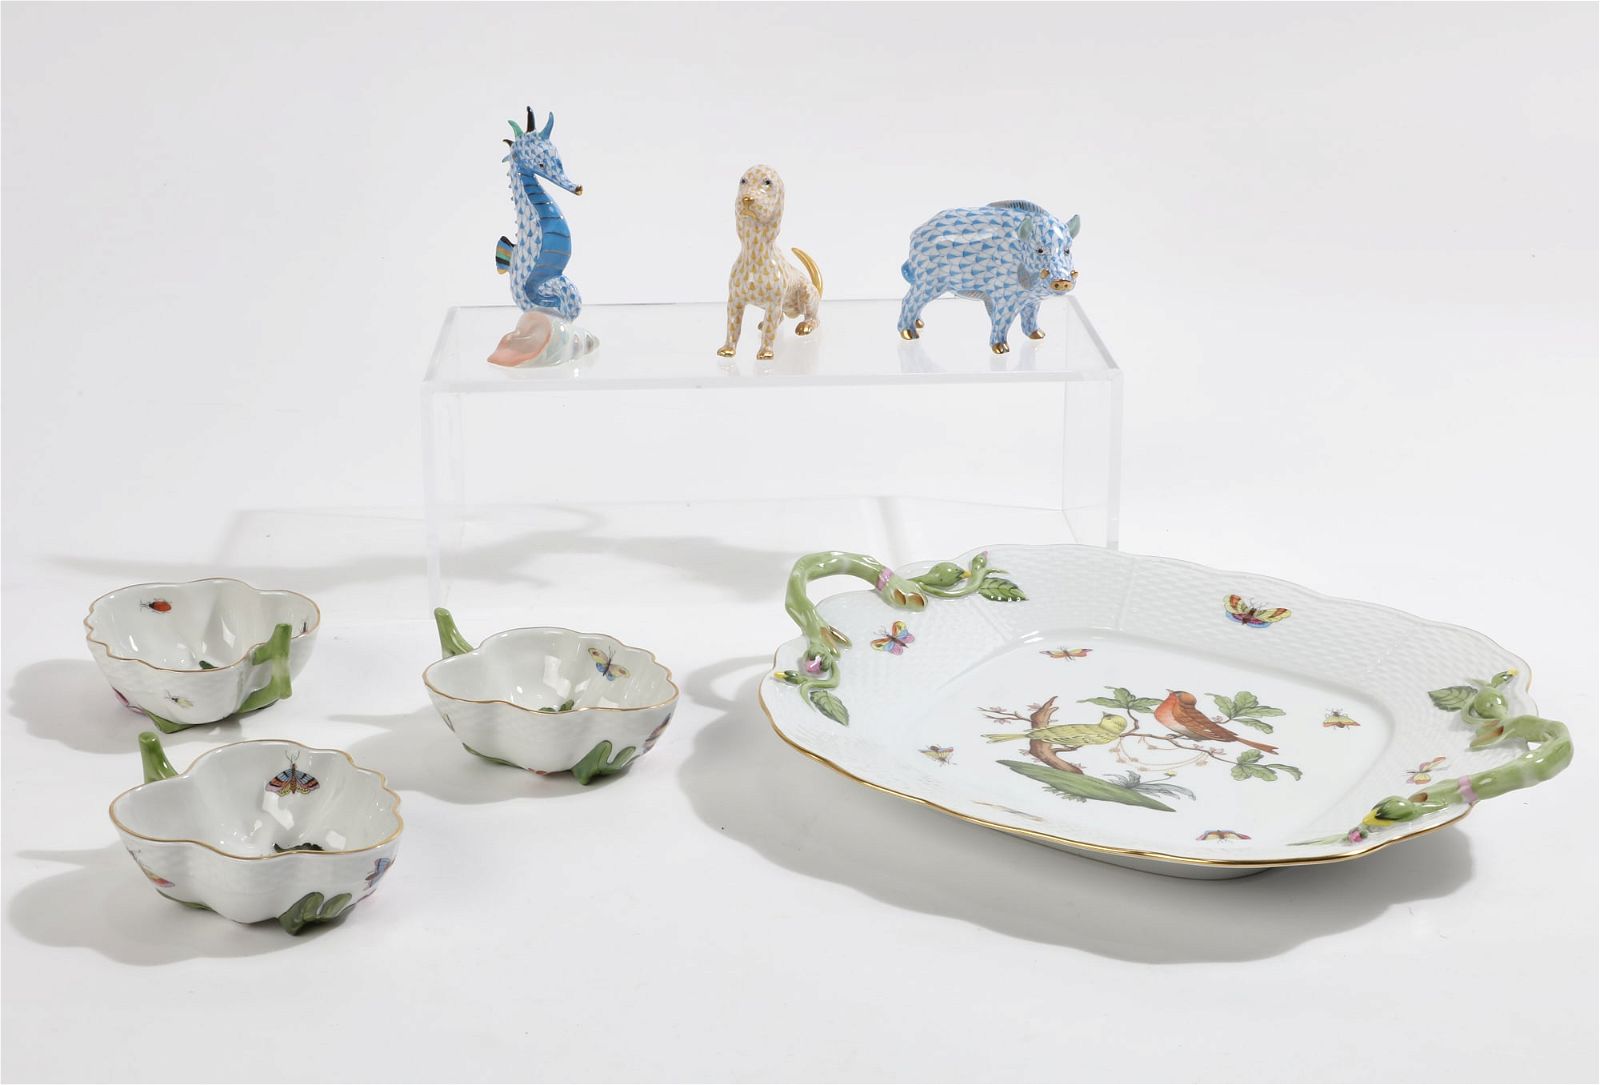 A GROUP OF HEREND PORCELAIN ARTICLESA